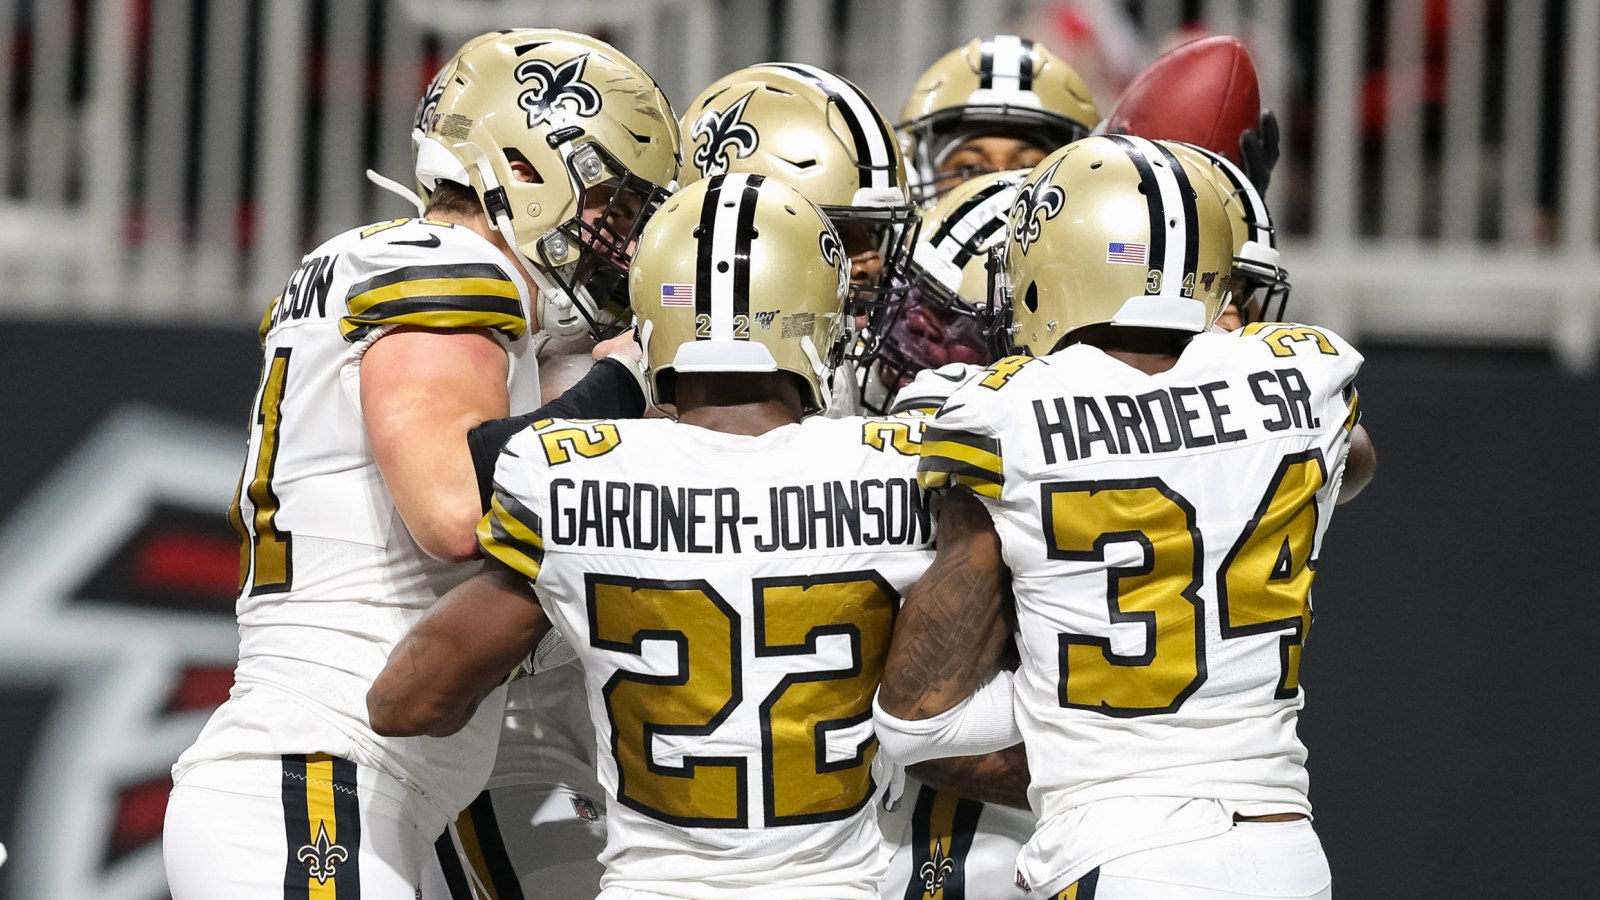 Playoff clinching scenarios for the Saints